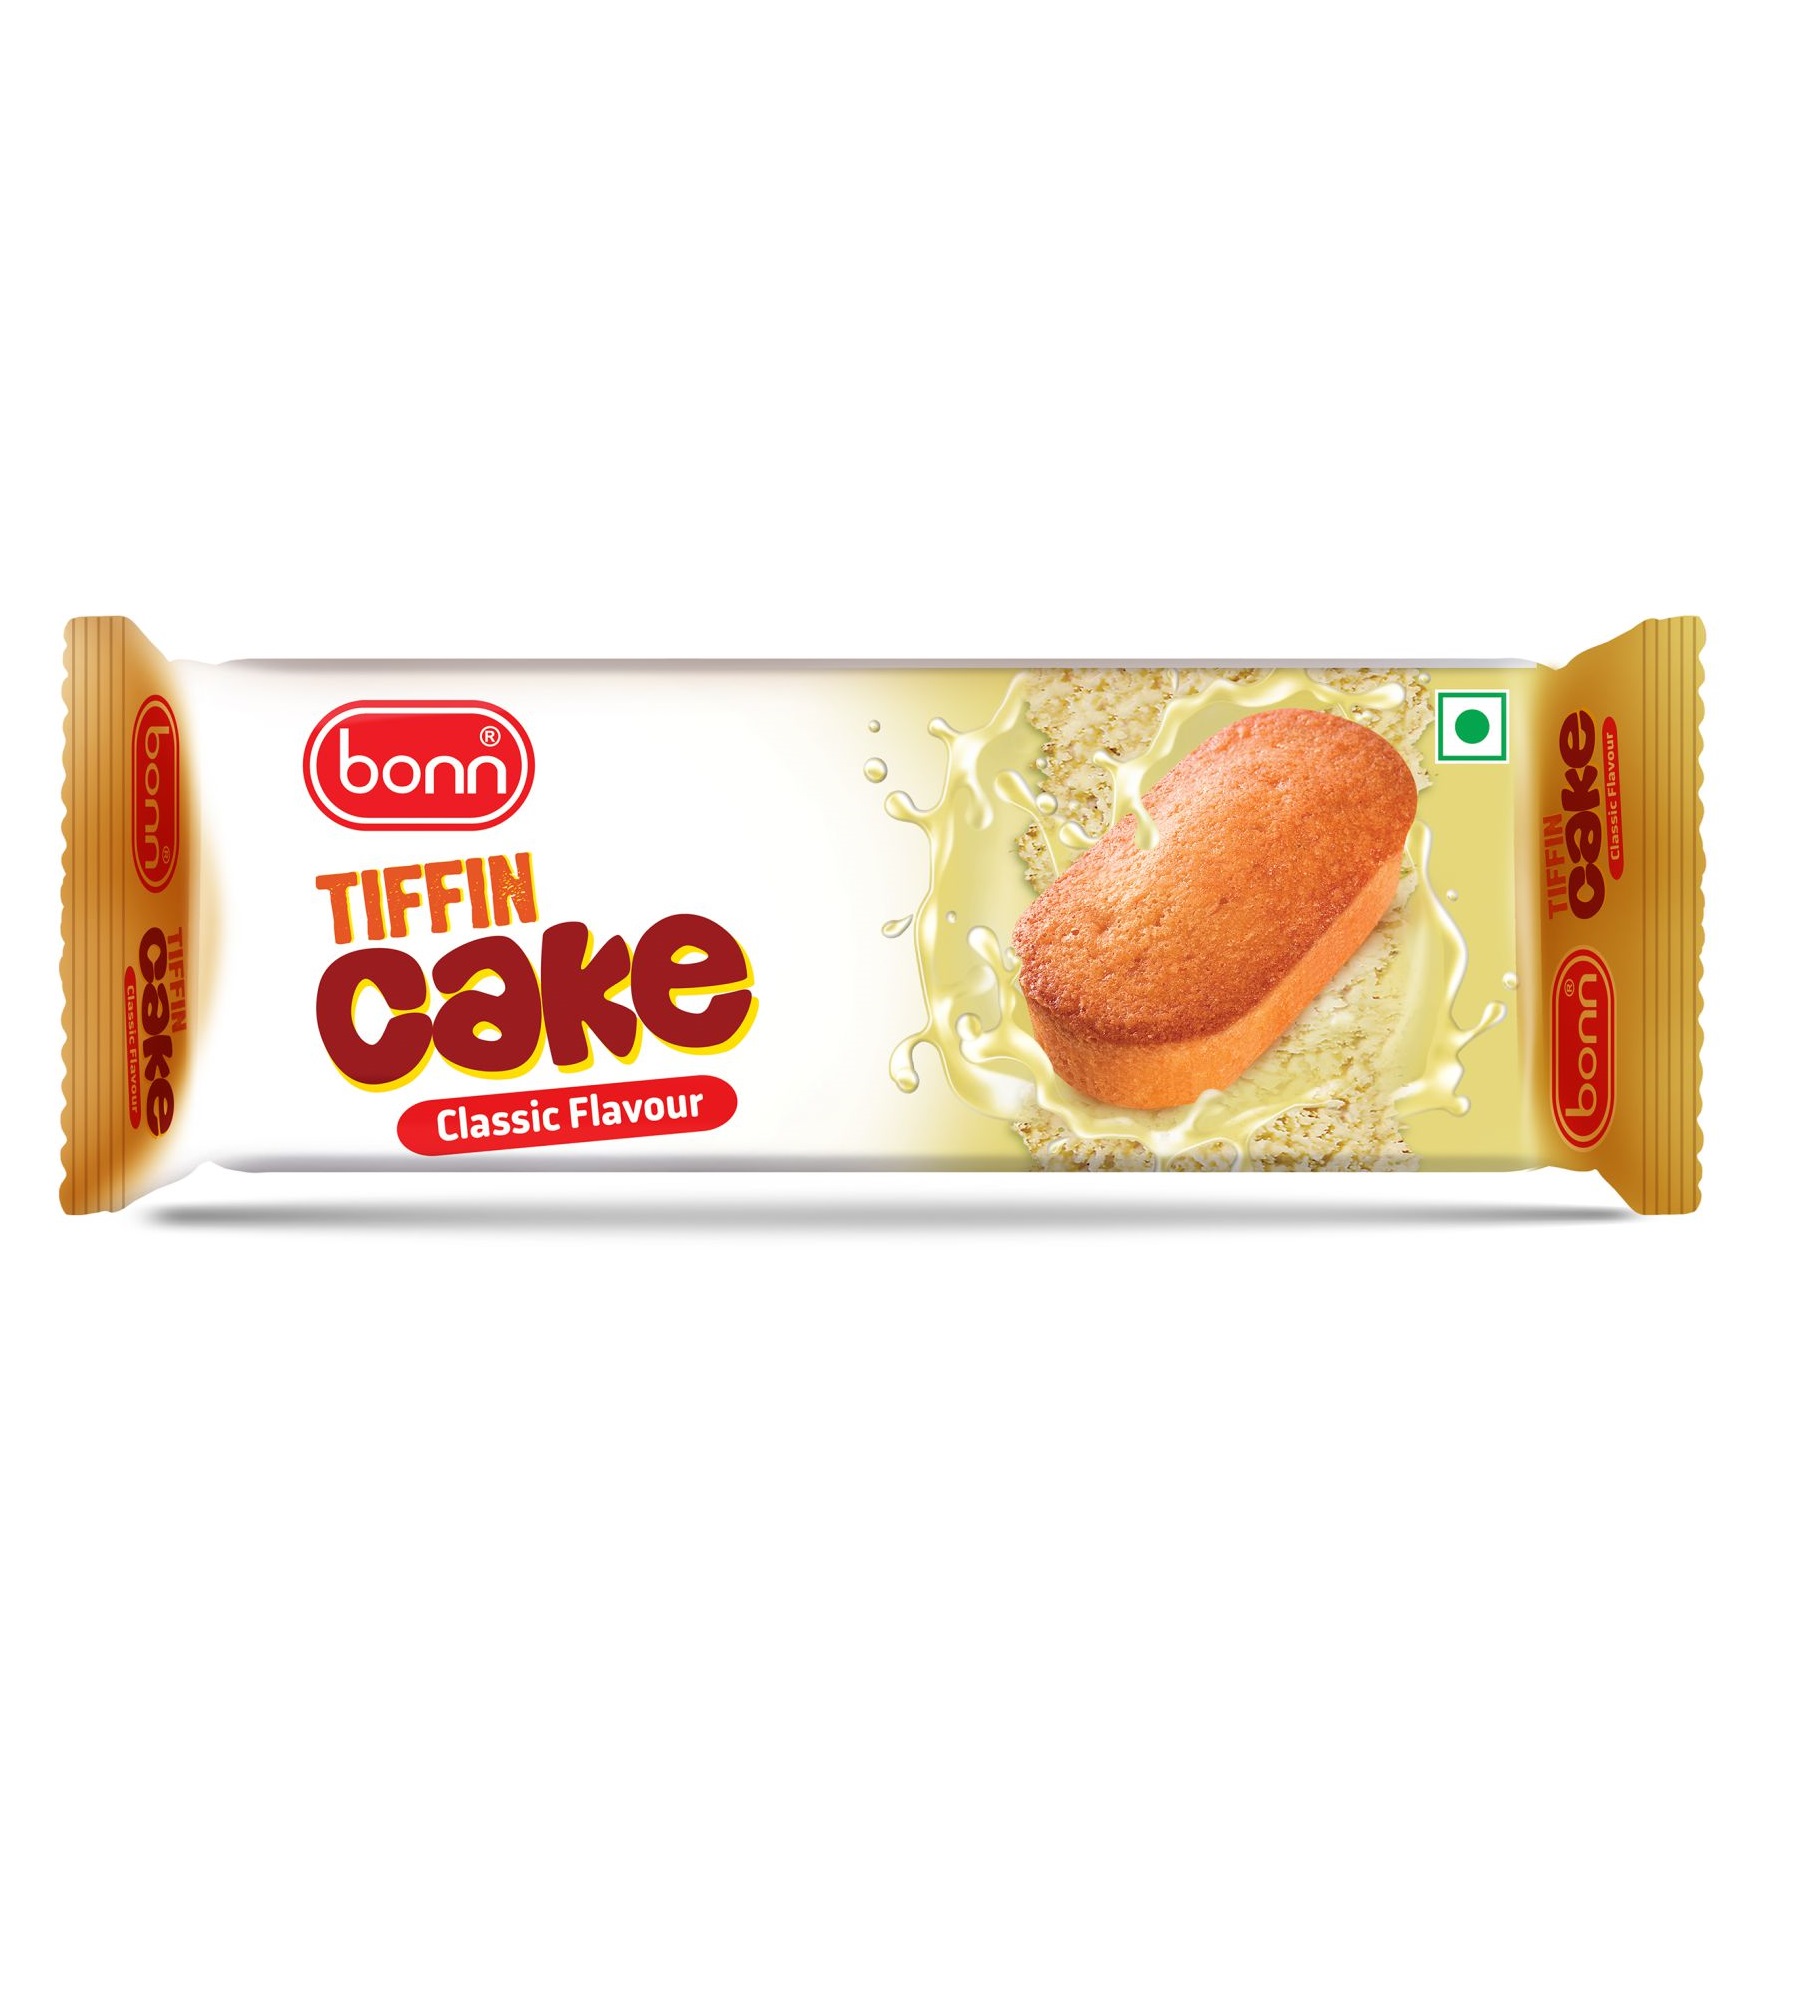 Bonn eggless Tiffin Cake classic flavour (Healthy and Delicious)Pack of 20(600 grams)